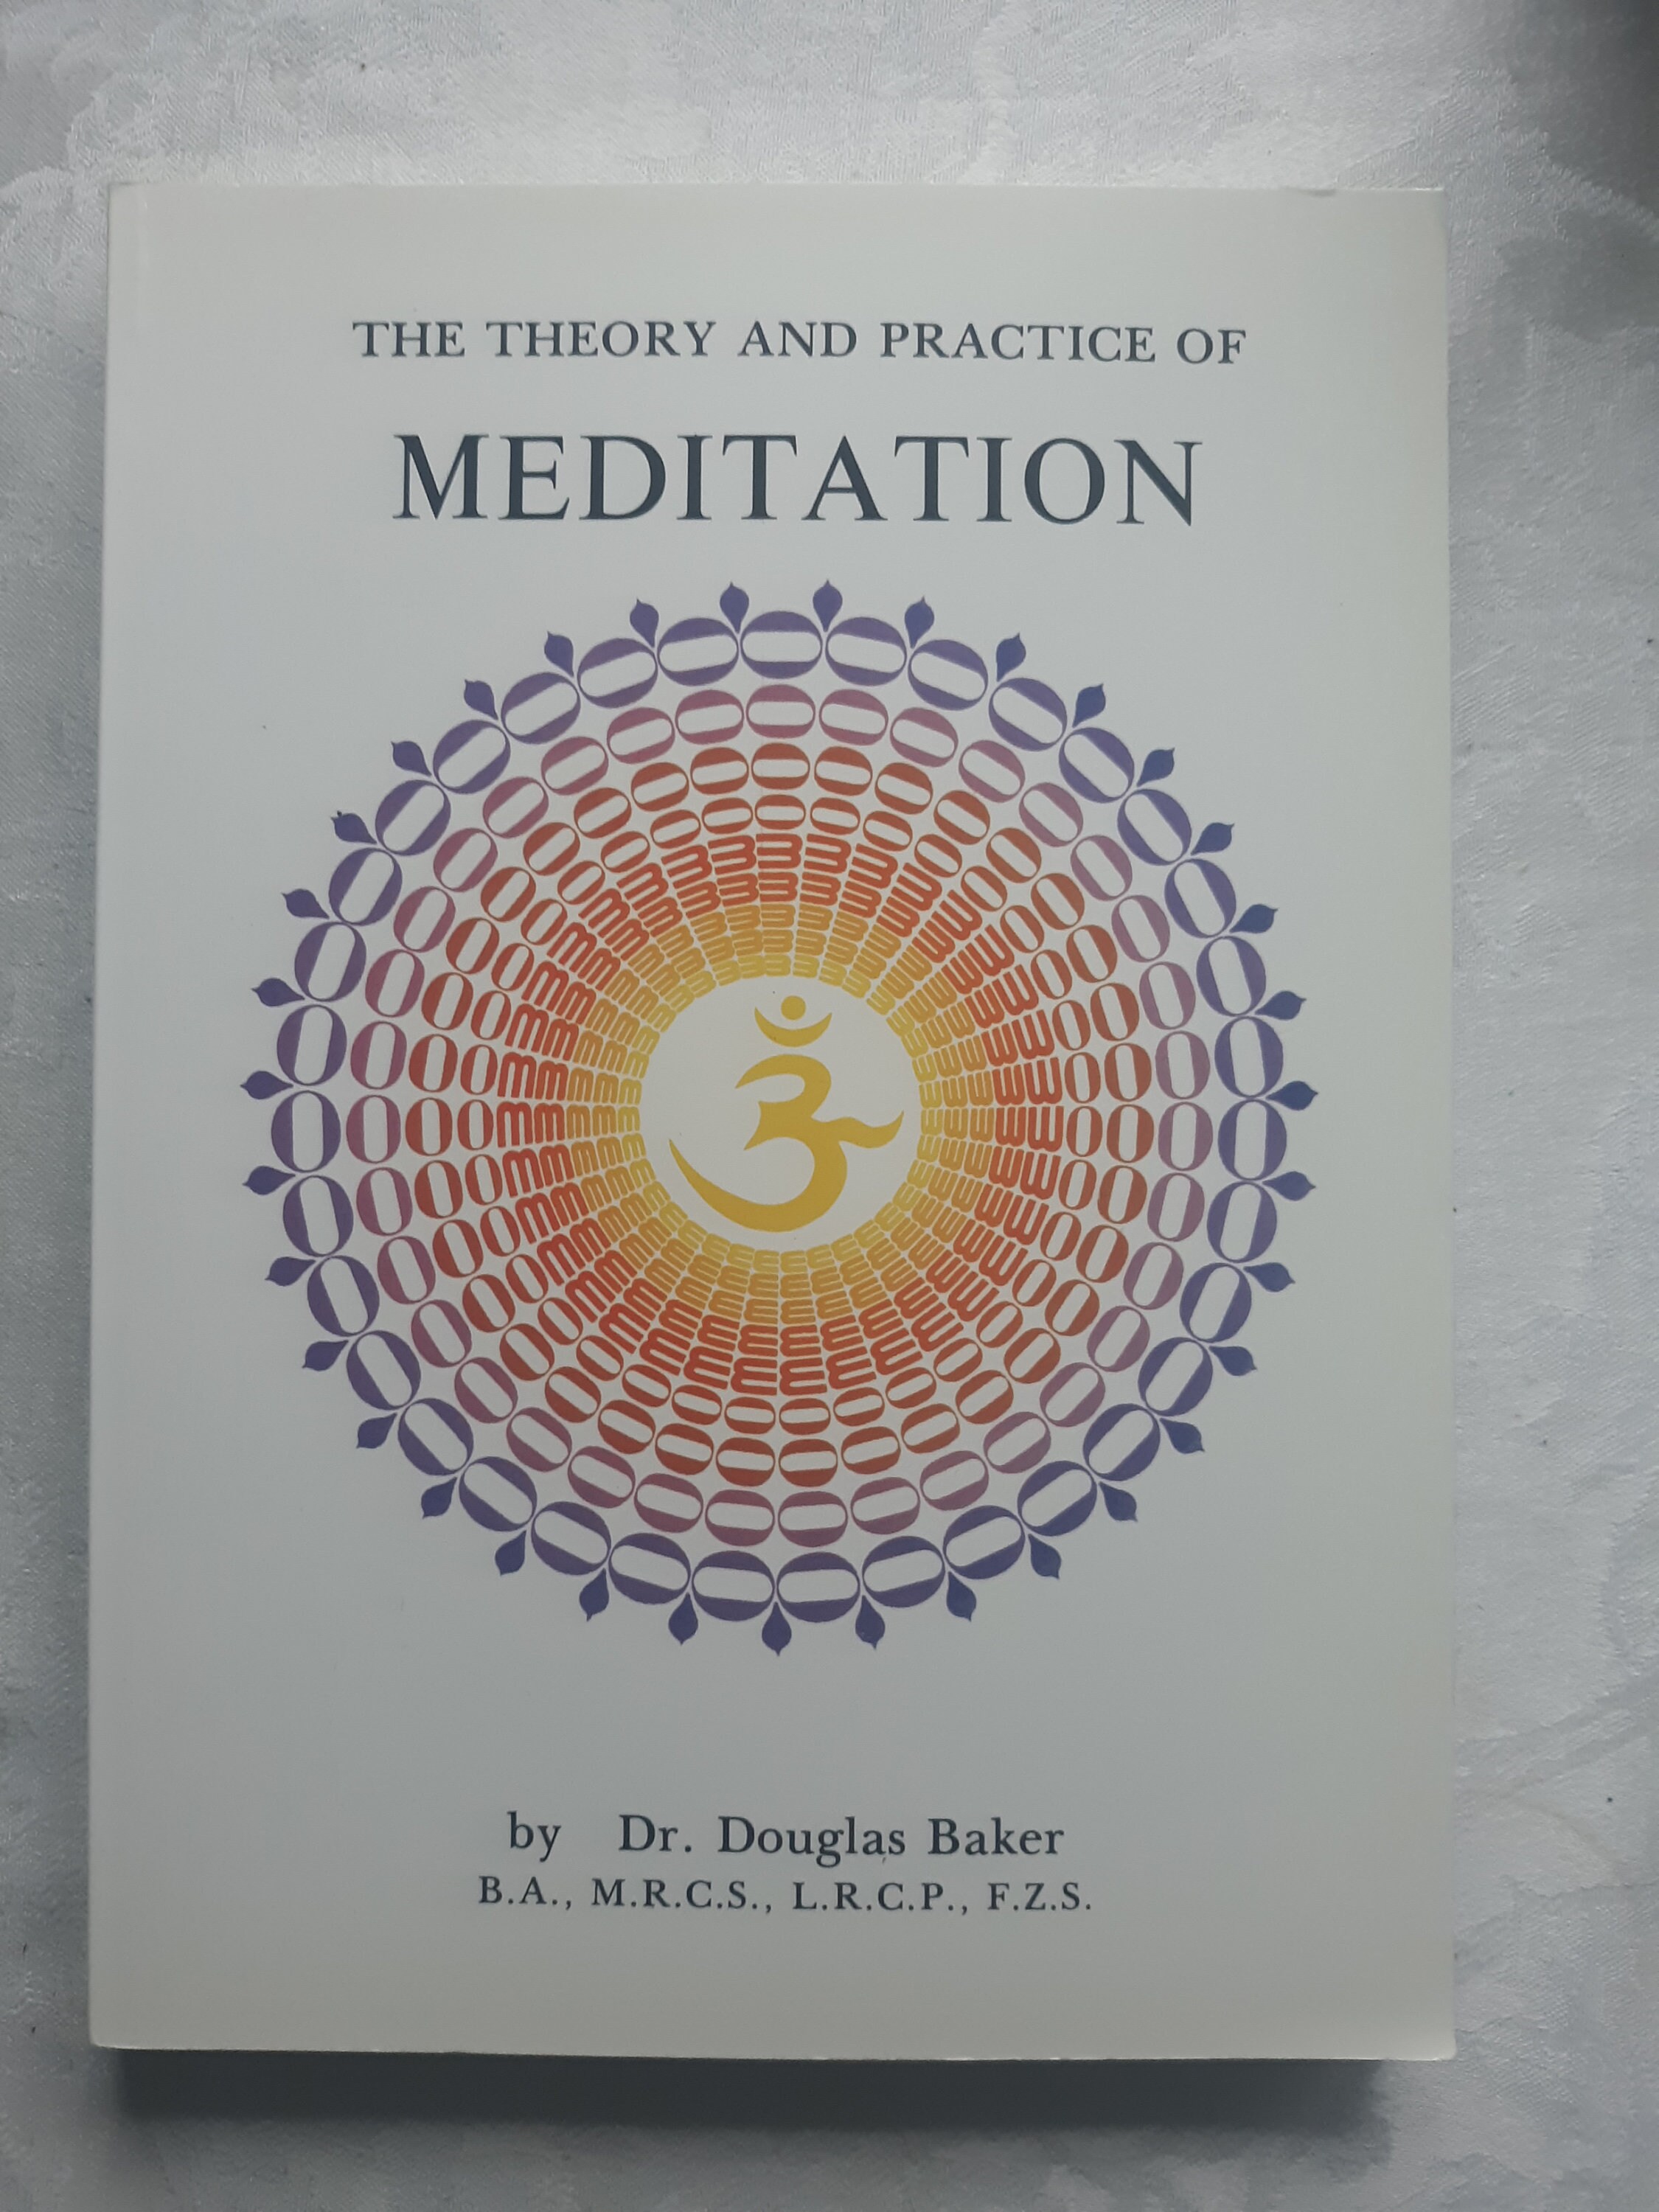 Practice　of　Meditation　the　Vintage　Book:　and　Meditation　Theory　Etsy